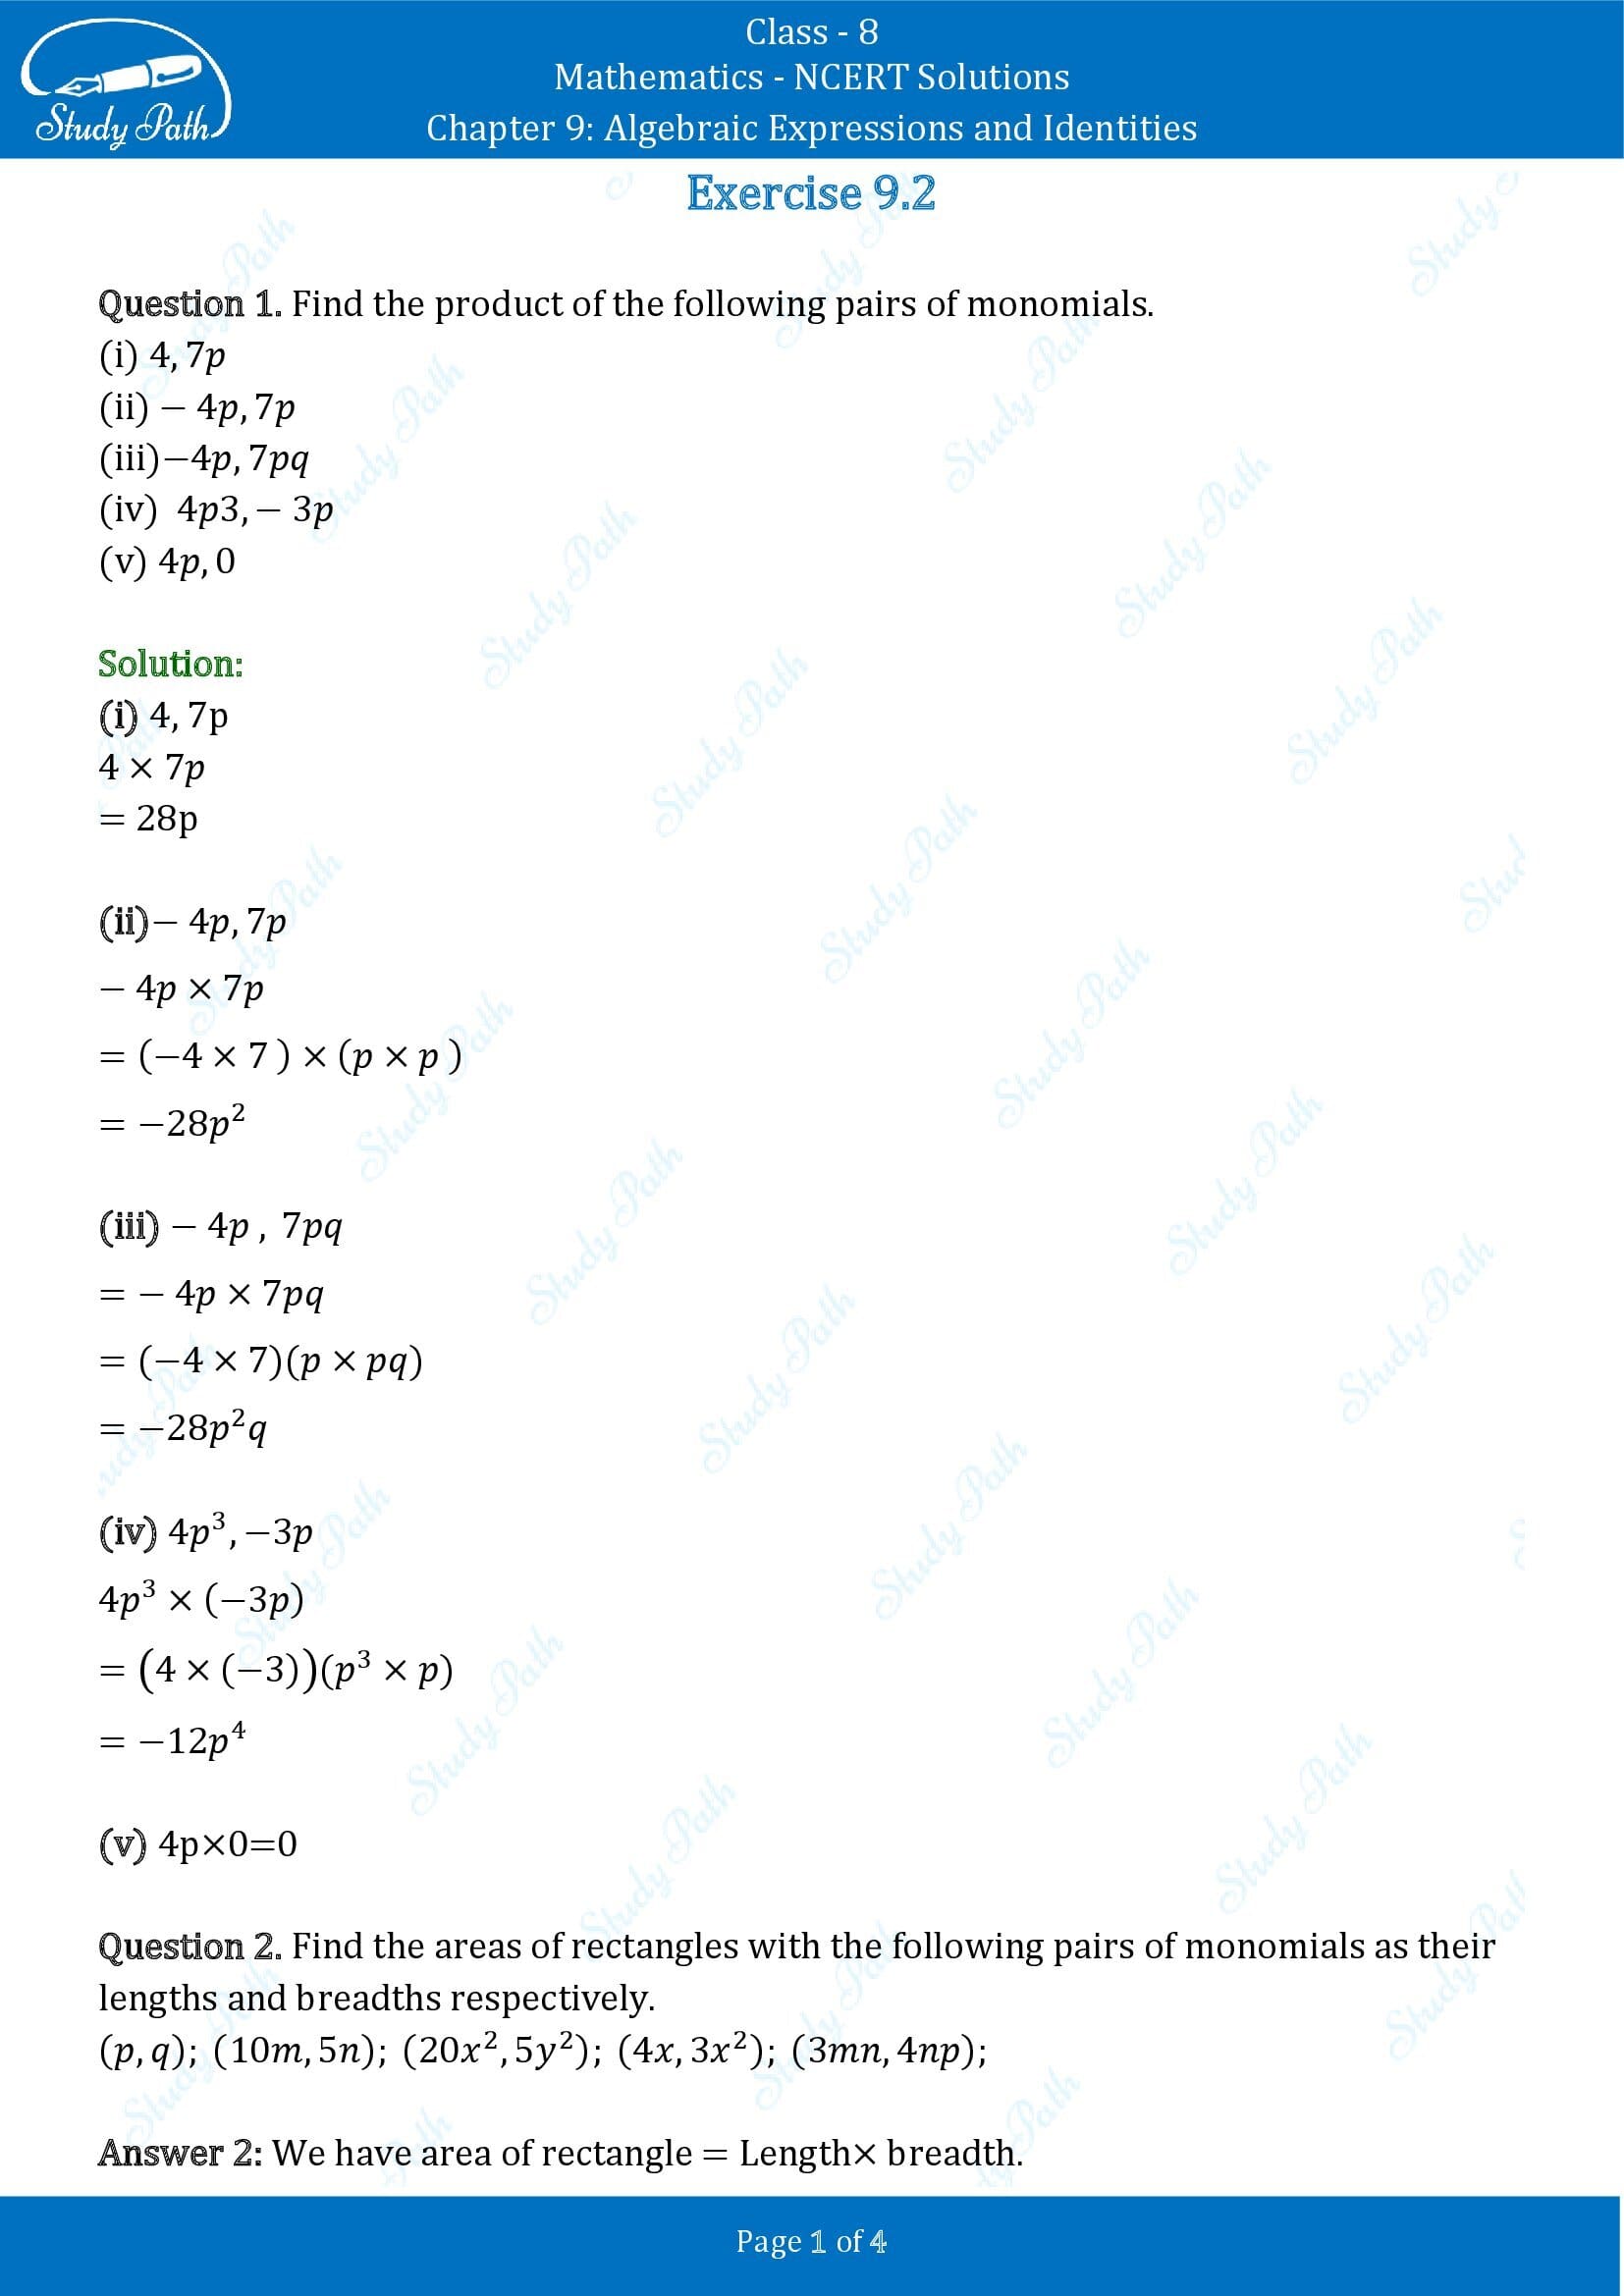 NCERT Solutions for Class 8 Maths Chapter 9 Algebraic Expressions and Identities Exercise 9.2 00001